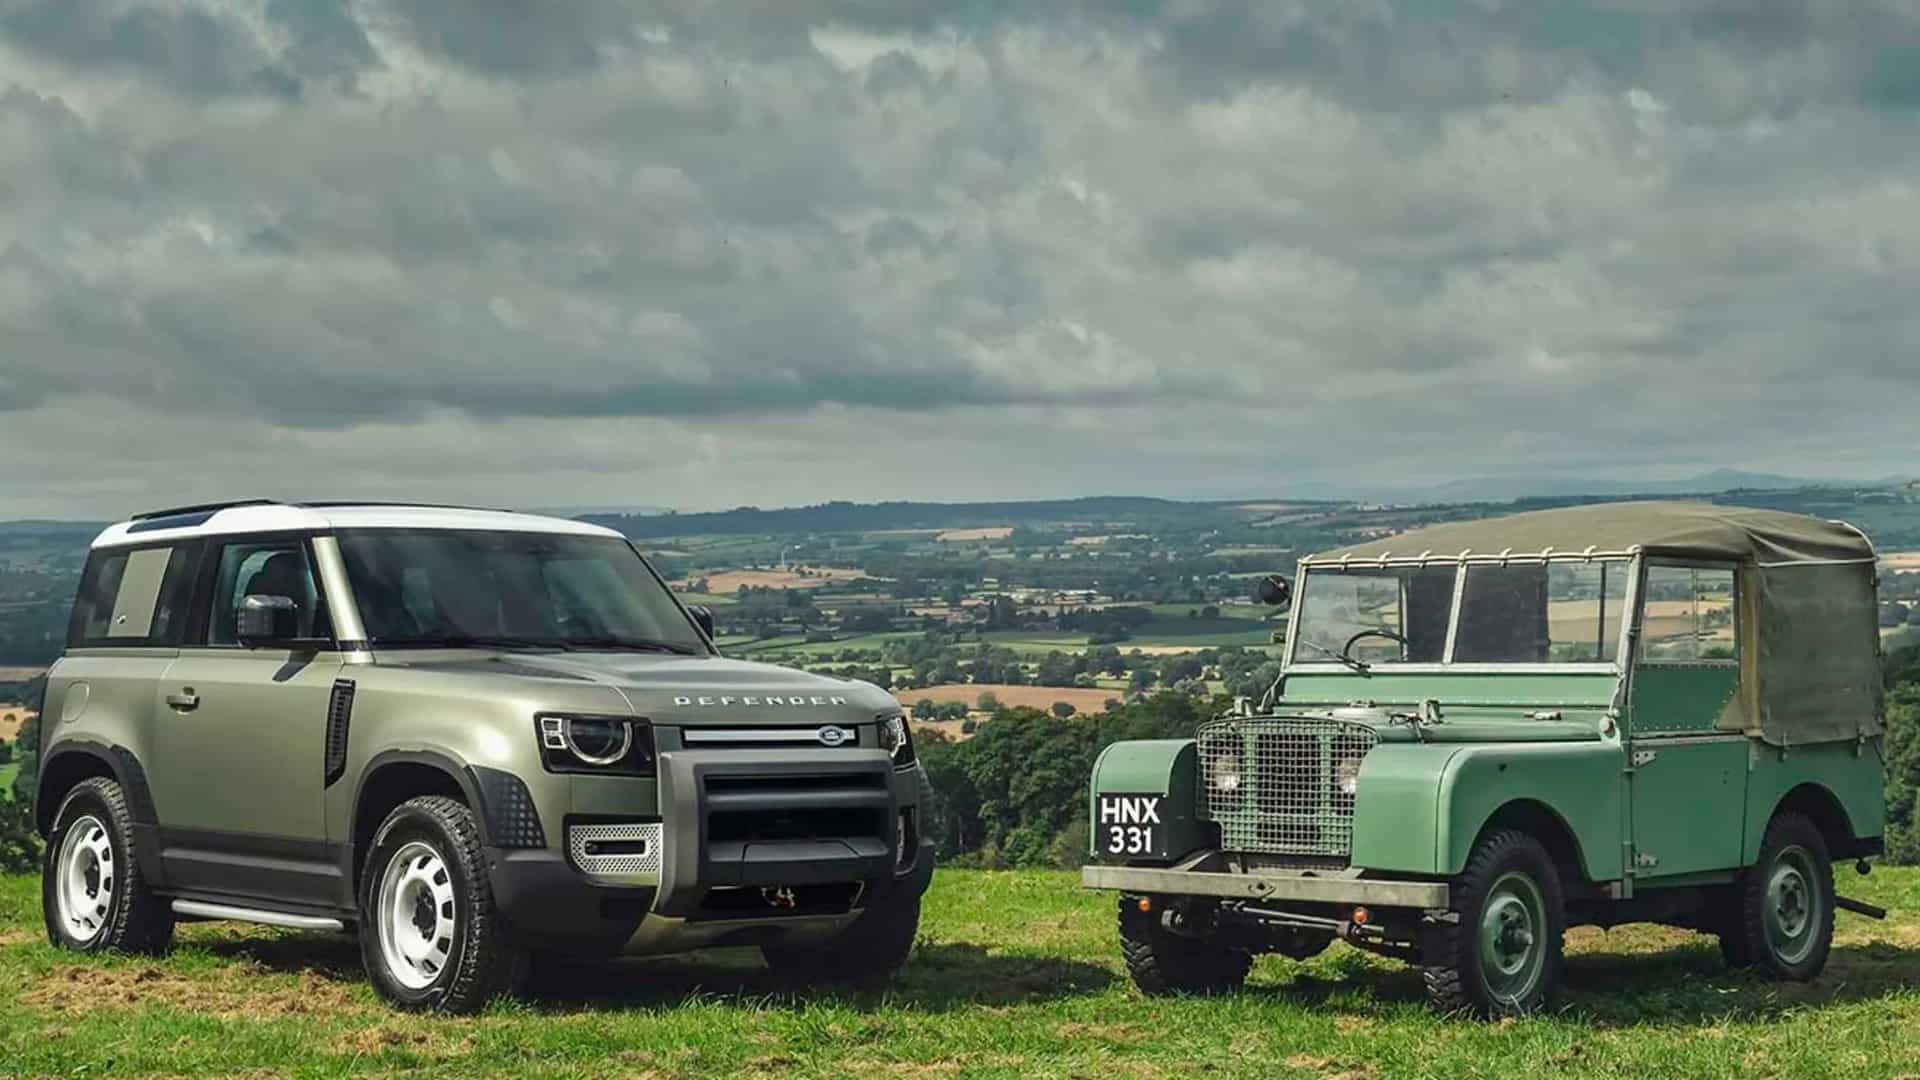 New and Old Defender face to face under open sky 